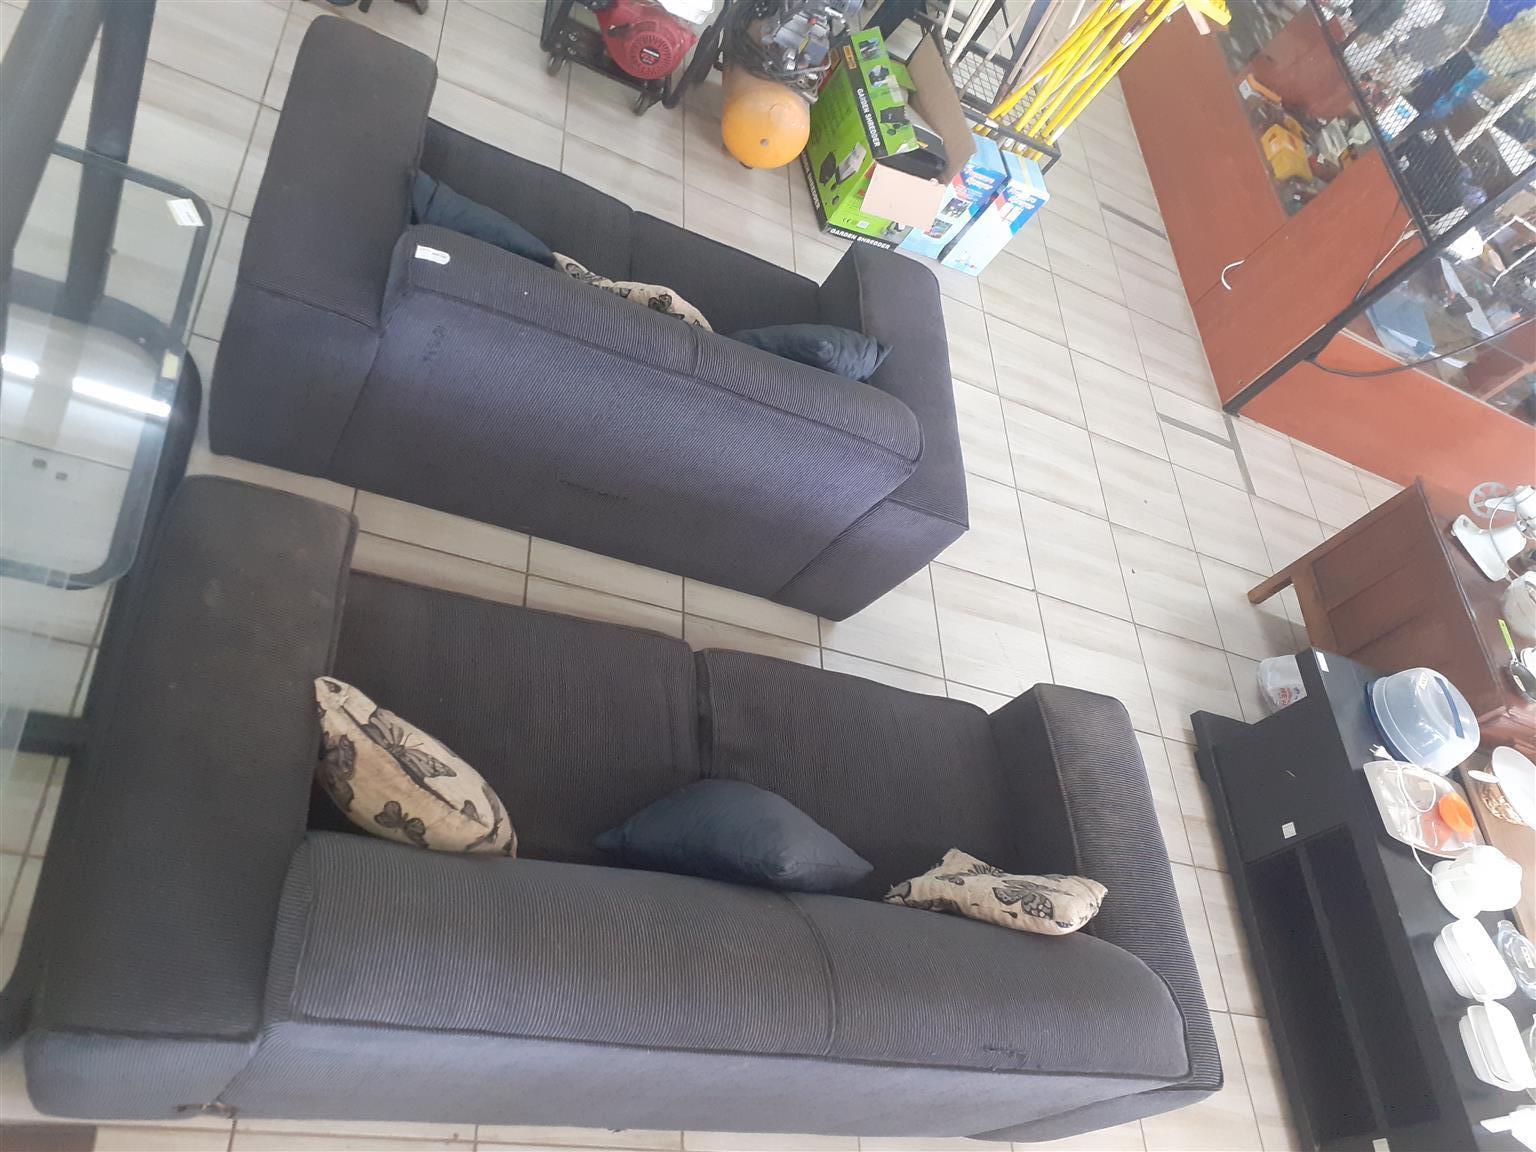 Couches 2 SEATER BY 2 SEATER (S110968A)